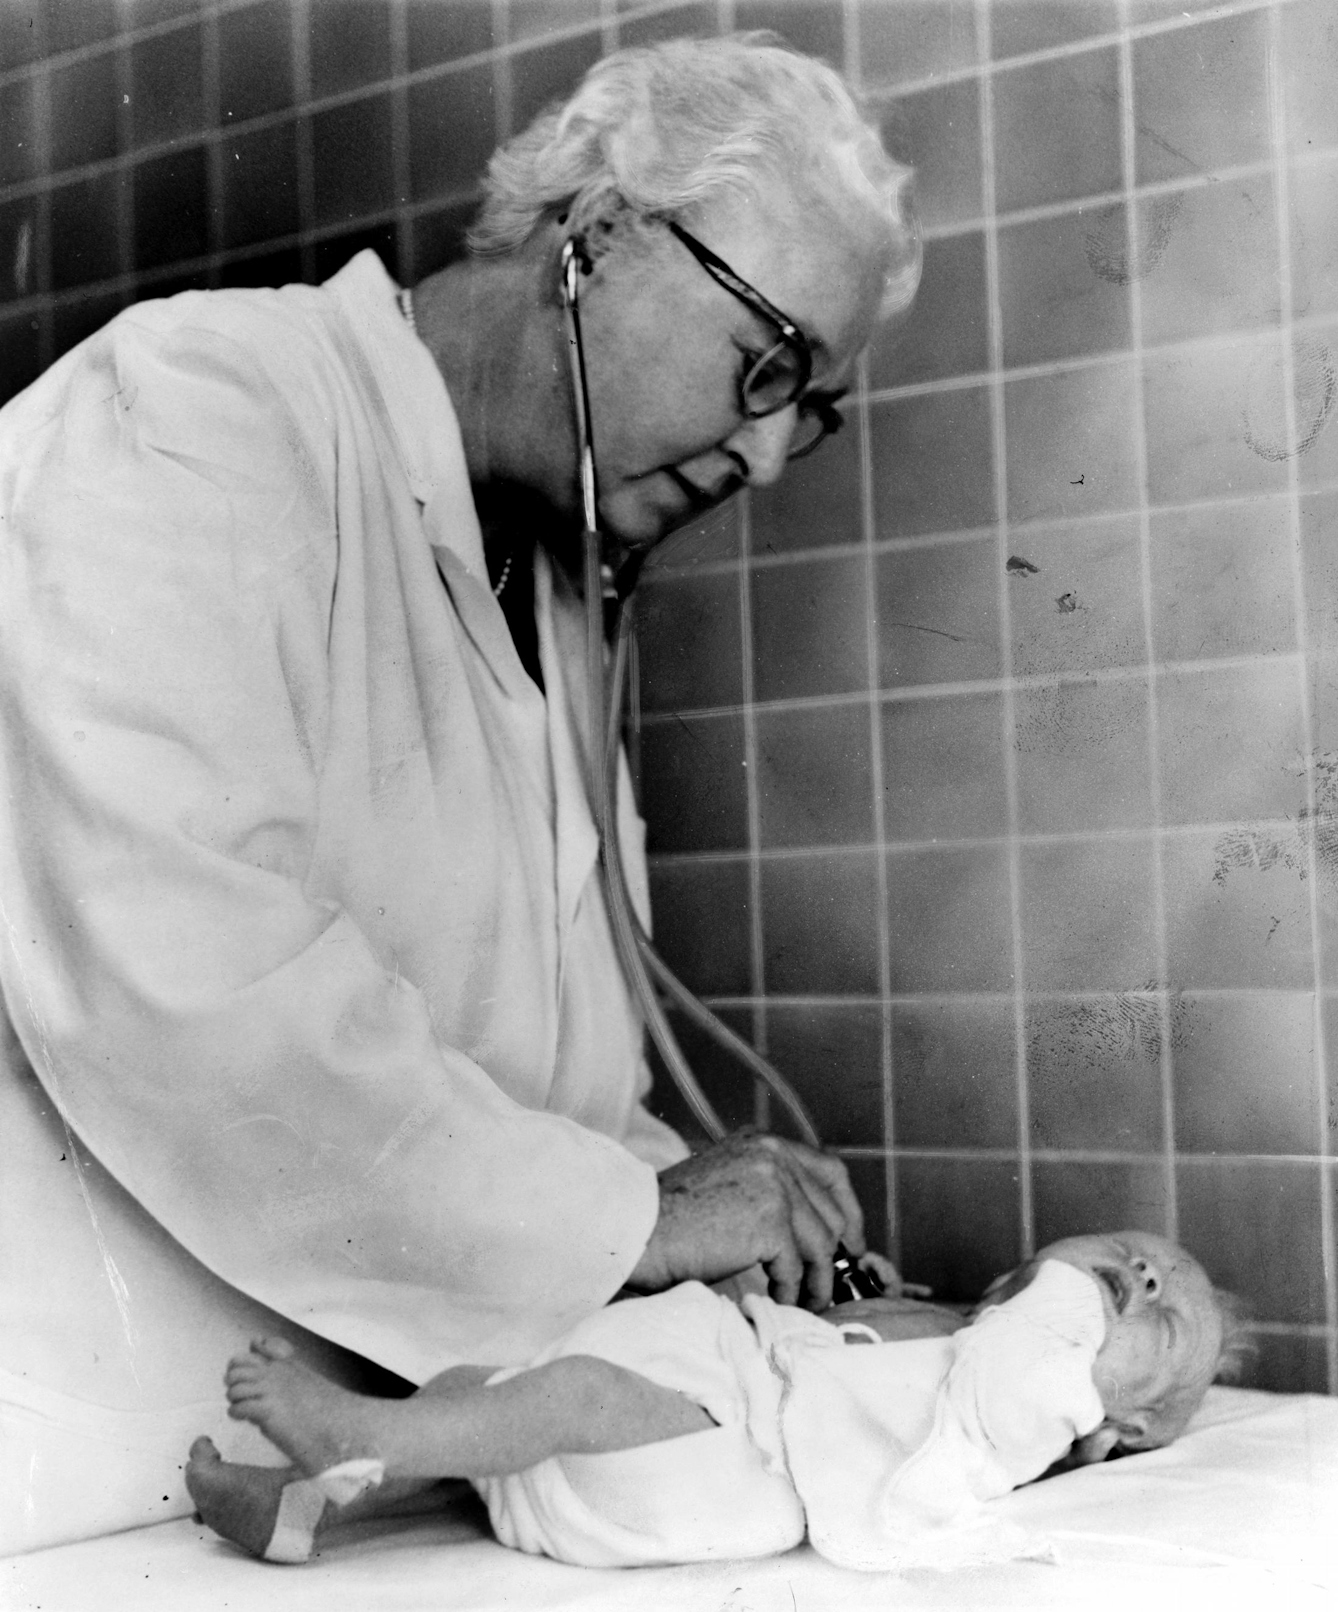 A black and white image of Virginia Apgar, in a white medical coat, standing over a newborn baby and using a stethoscope to measure their heart rate.